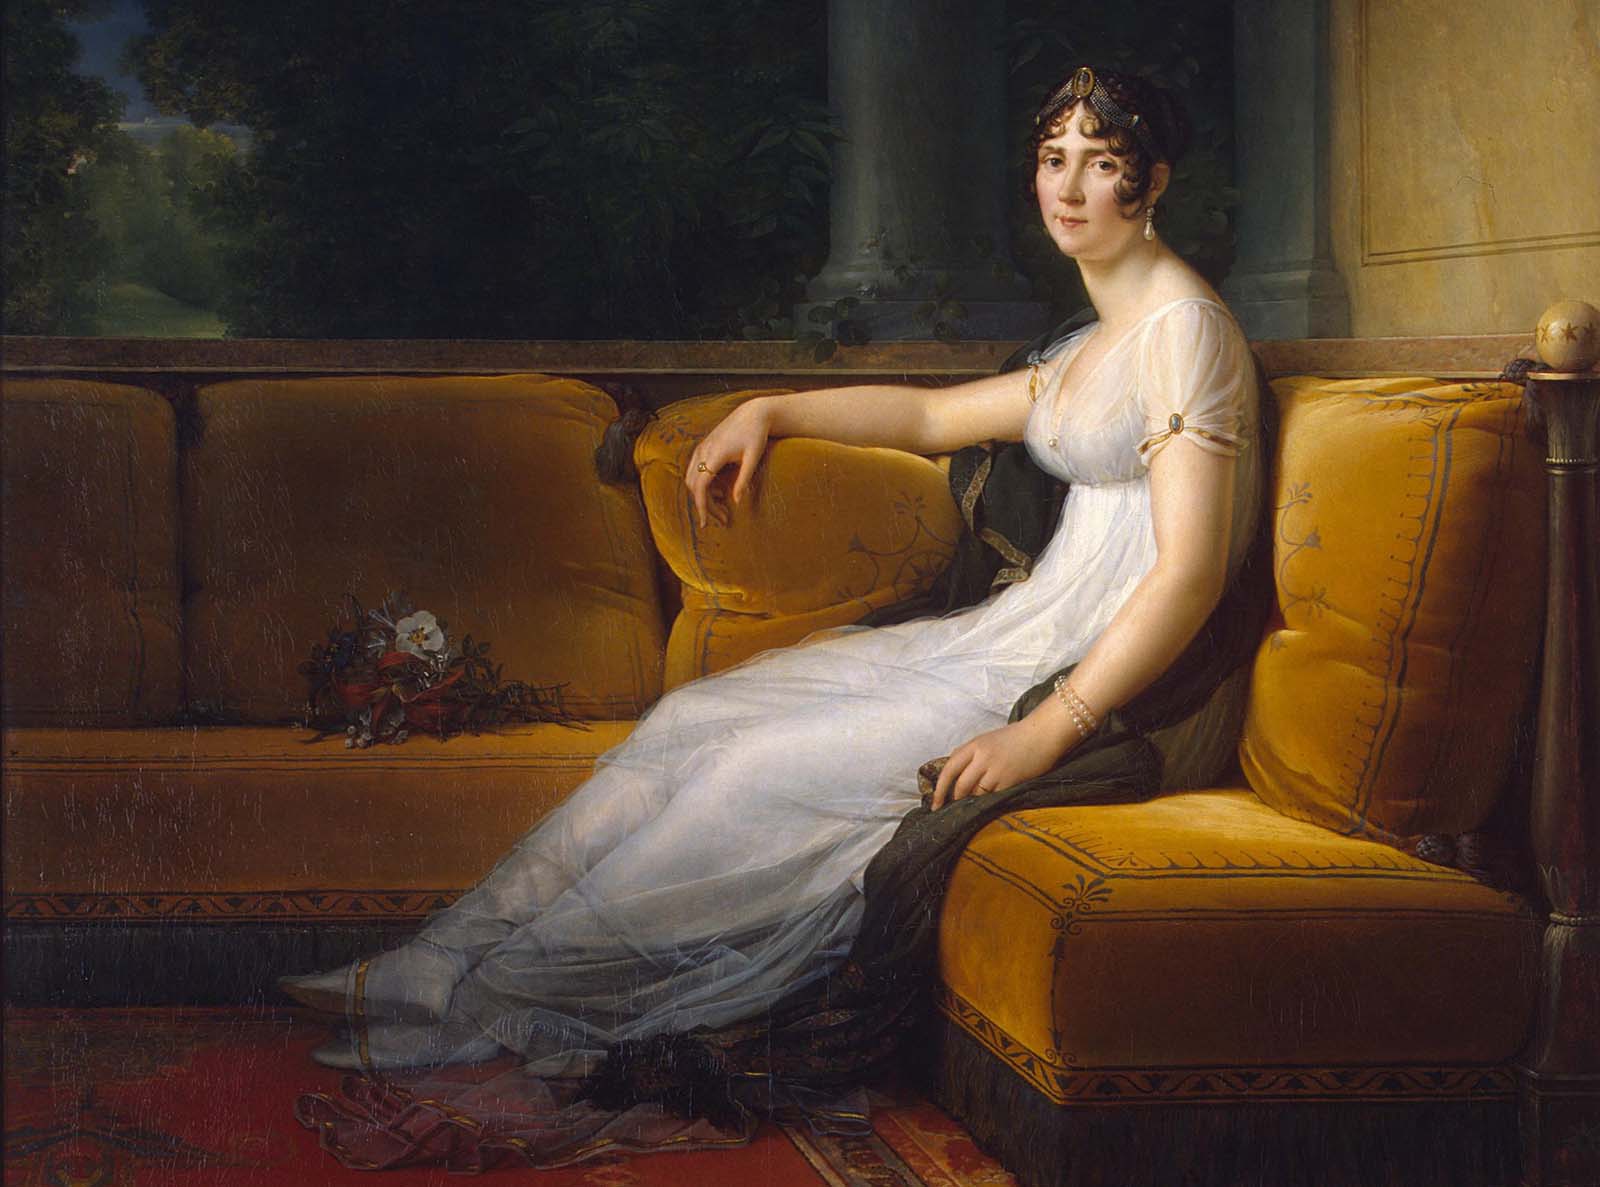 Josephine died of pneumonia soon after walking with Russian Emperor Alexander I, allegedly begging to join Napoleon in exile. Painting by François Gérard